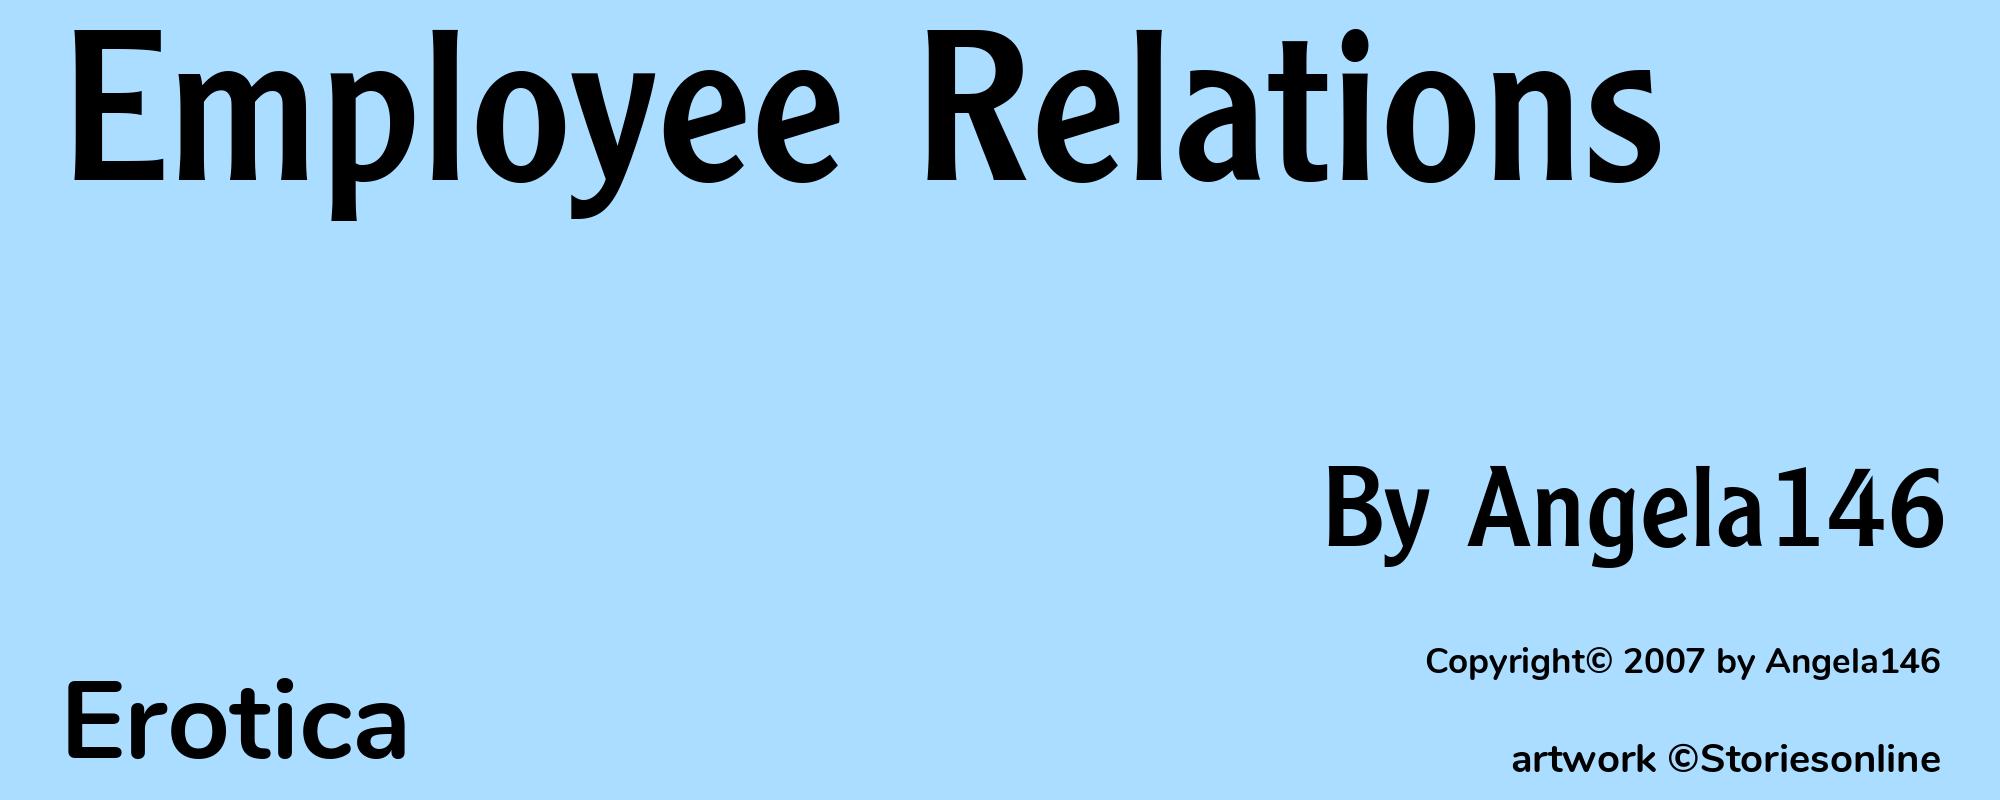 Employee Relations - Cover